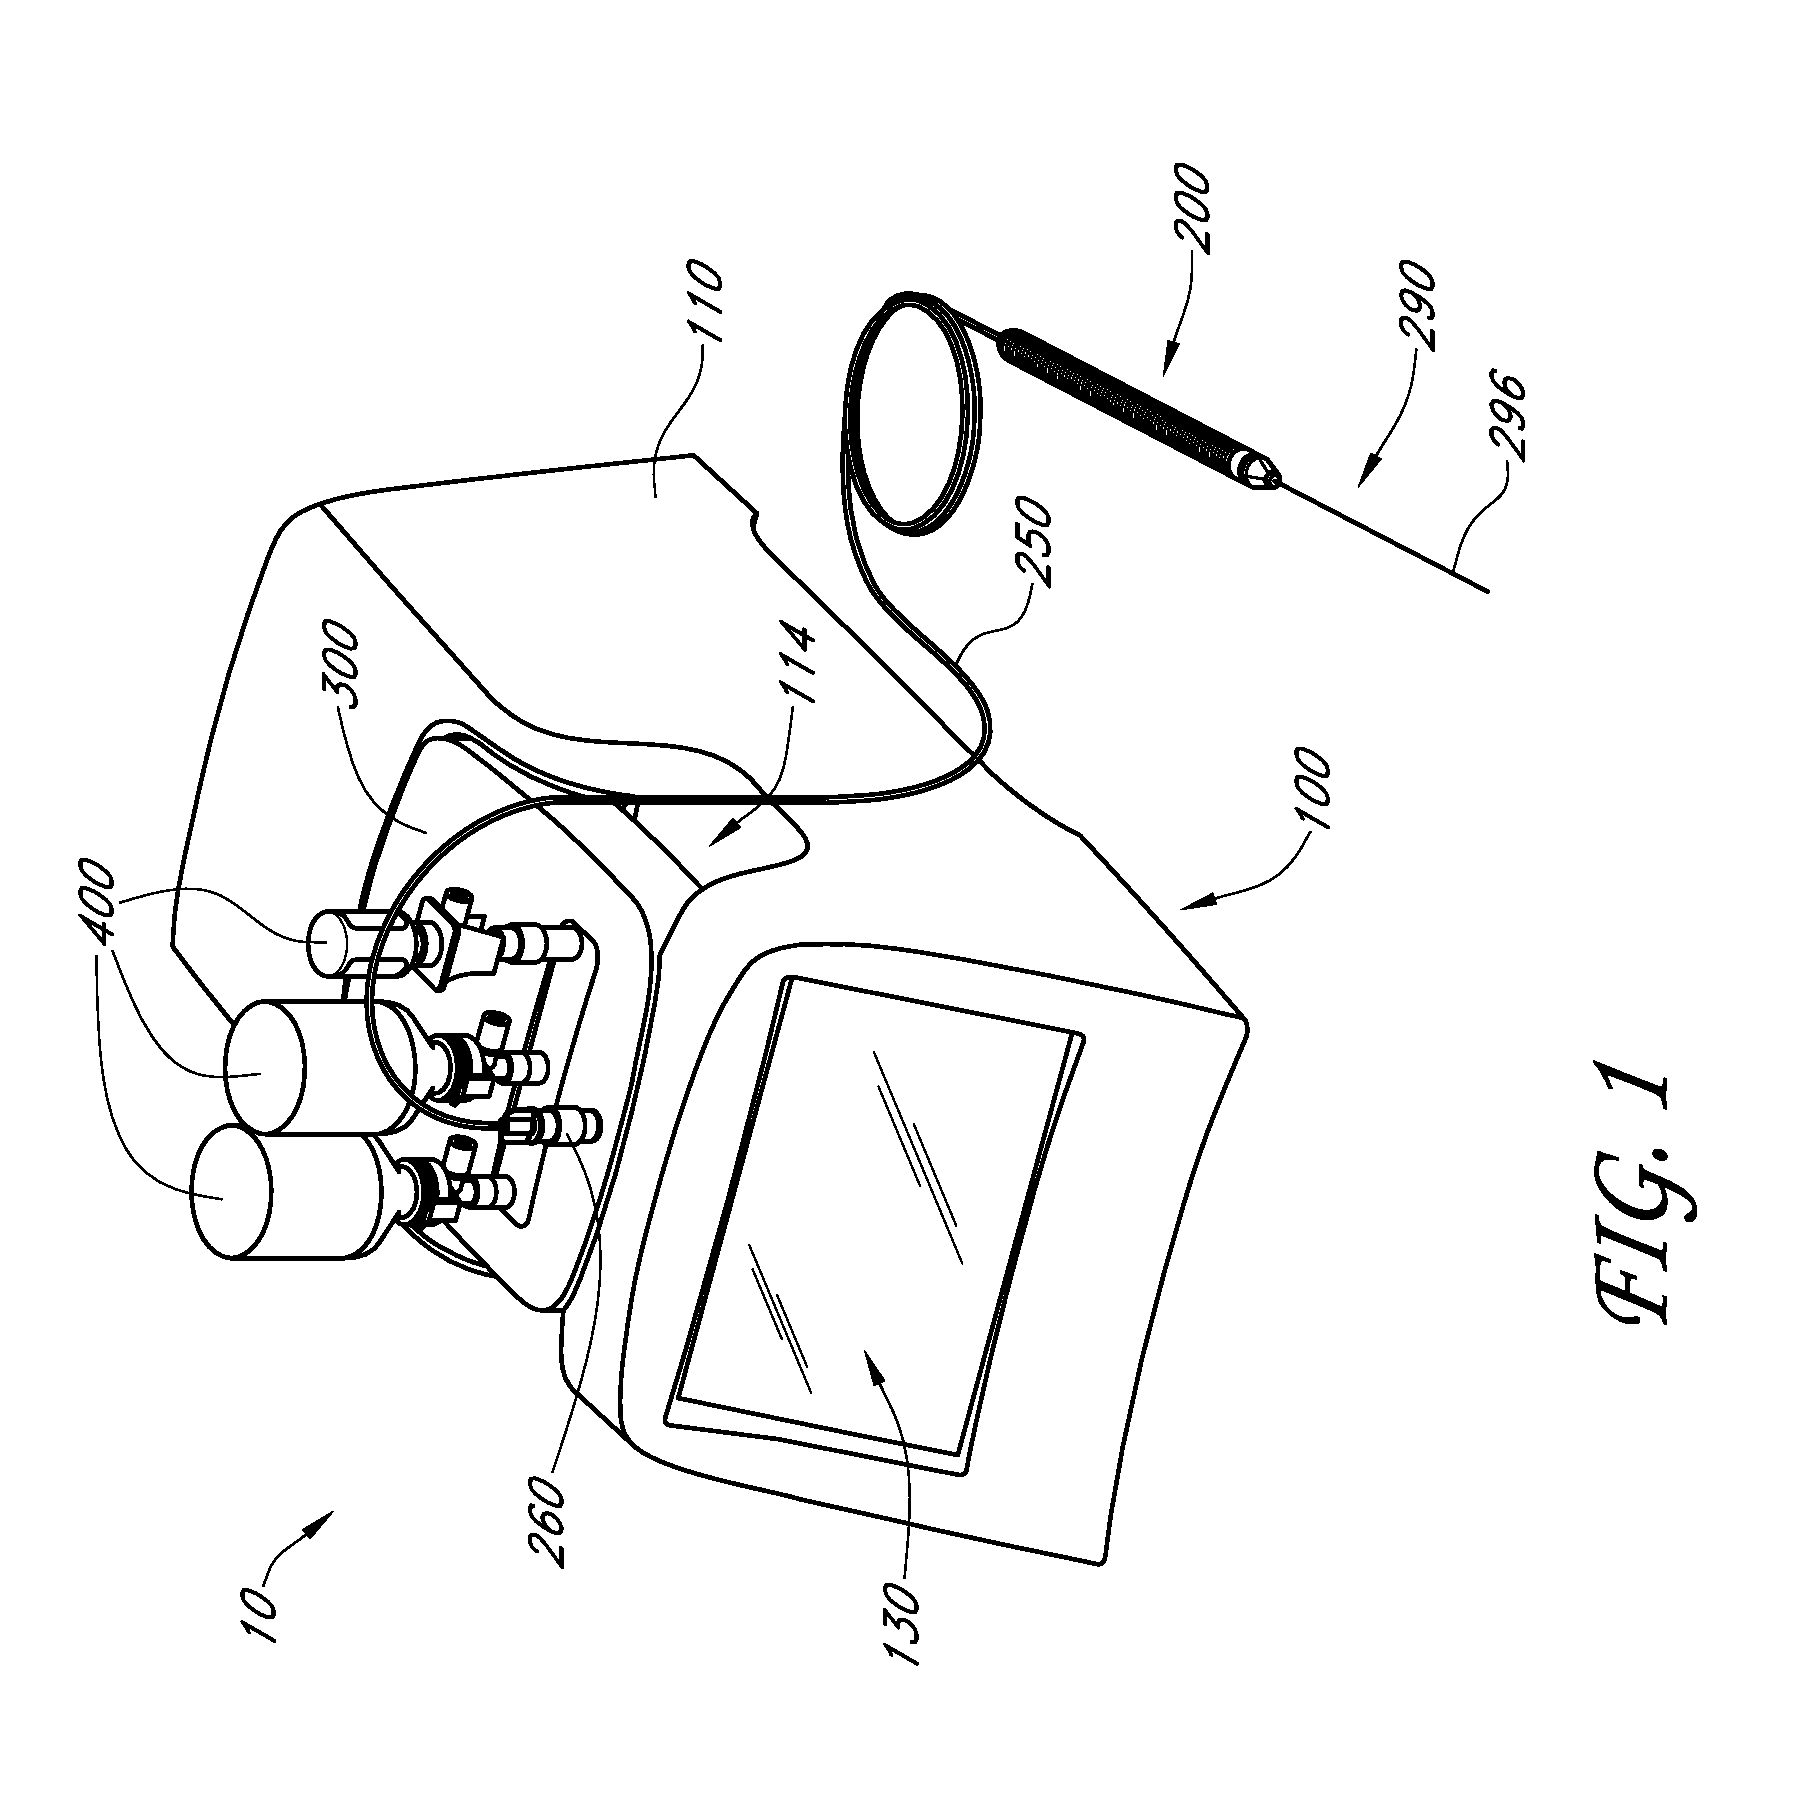 Imaging-guided anesthesia injection systems and methods